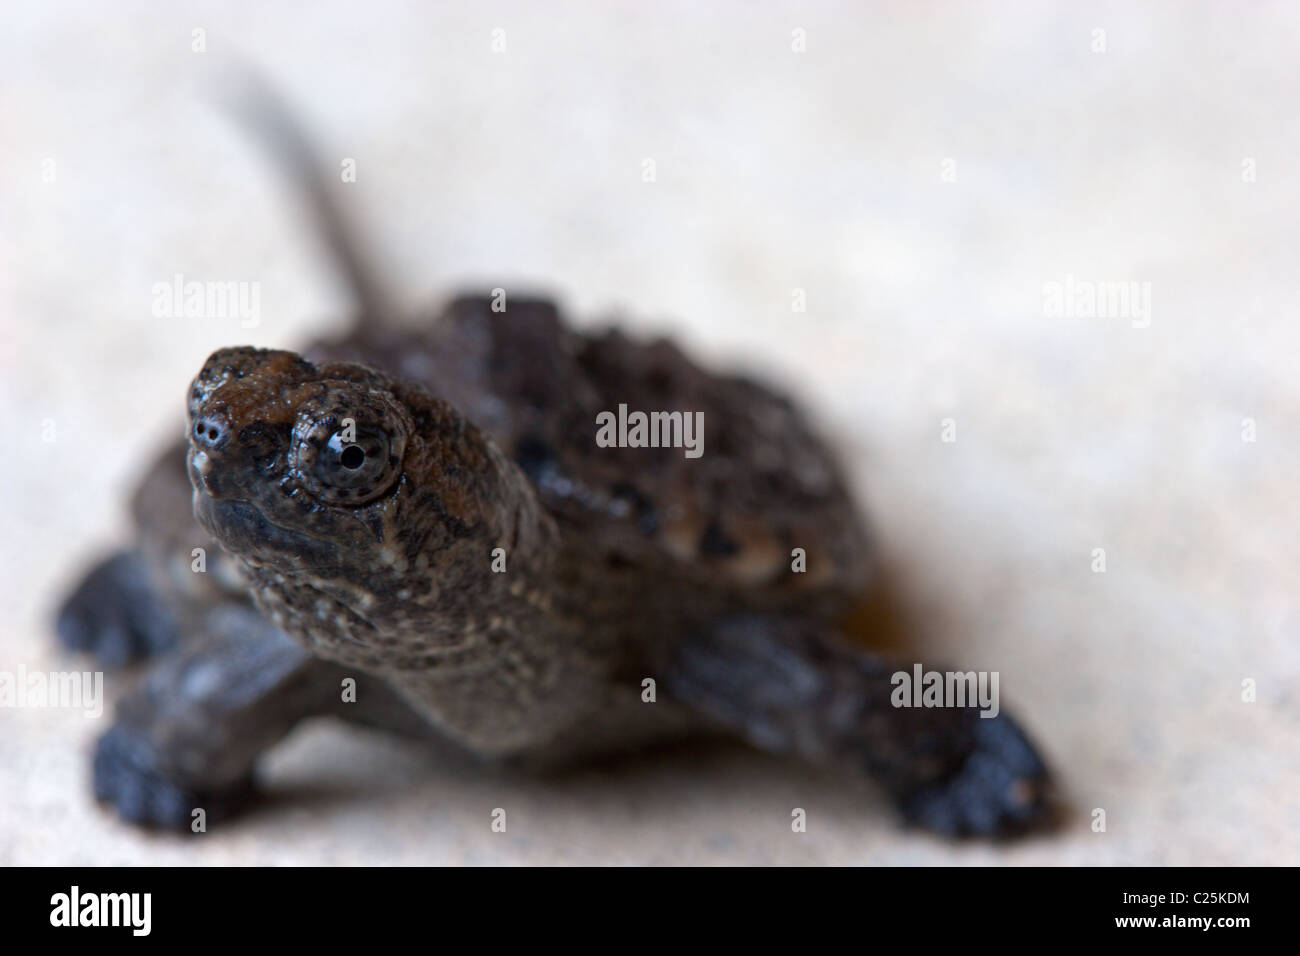 baby snapping turtles turtle reptile shell animal Stock Photo